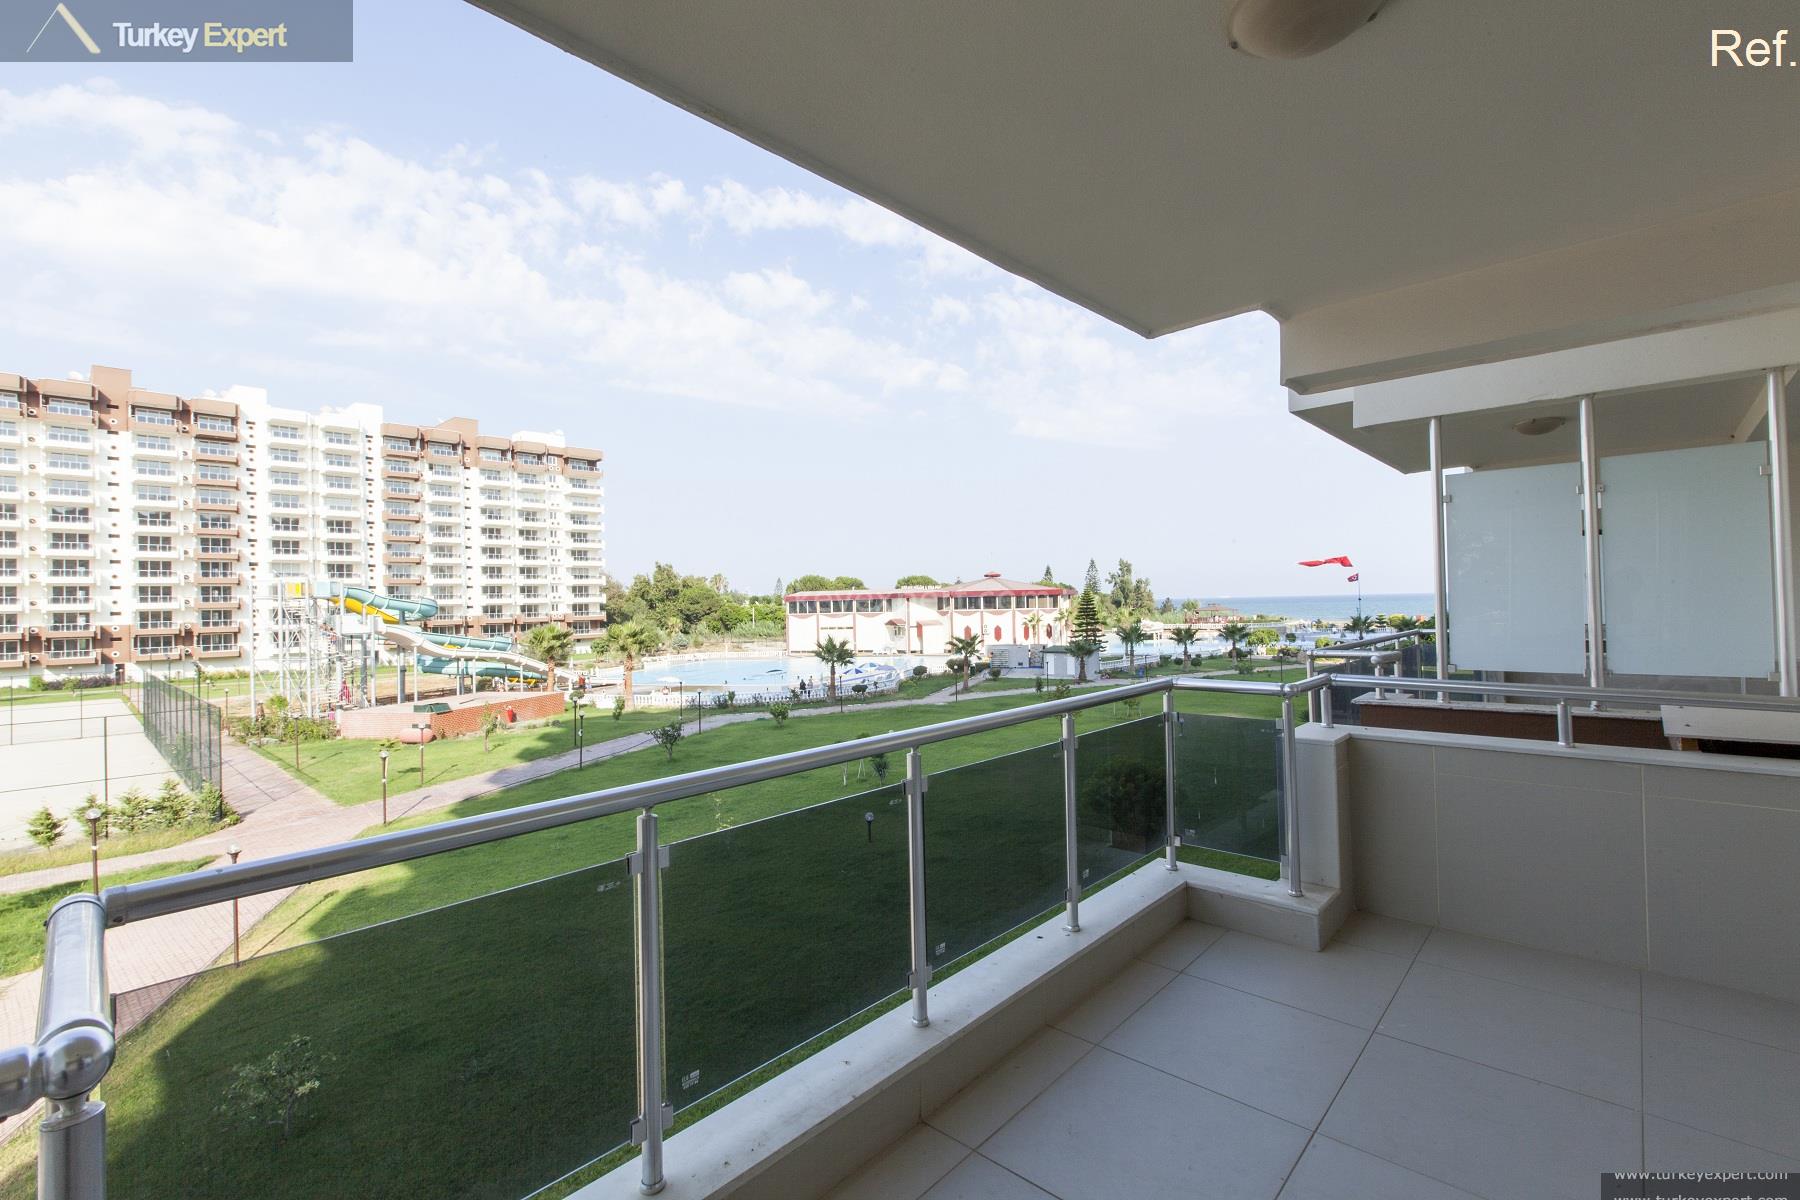 Mersin apartments right next to the sea, in a complex with 5 swimming pools 0